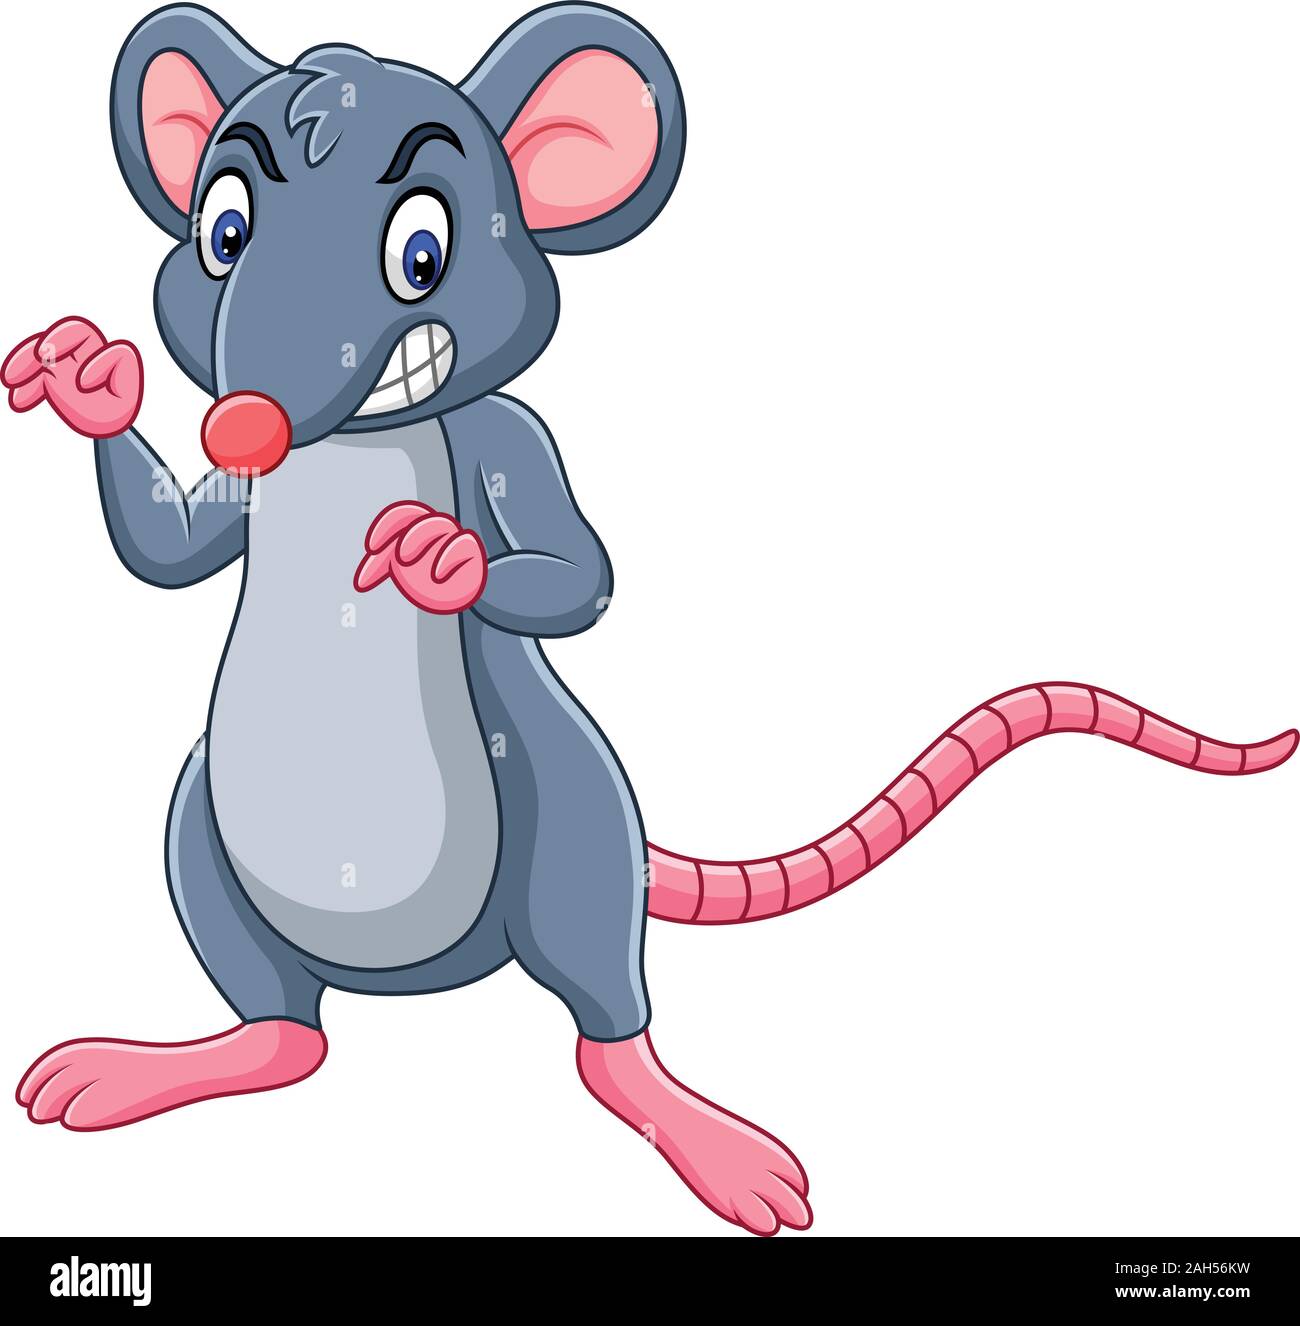 Cartoon rat with angry expression Stock Vector